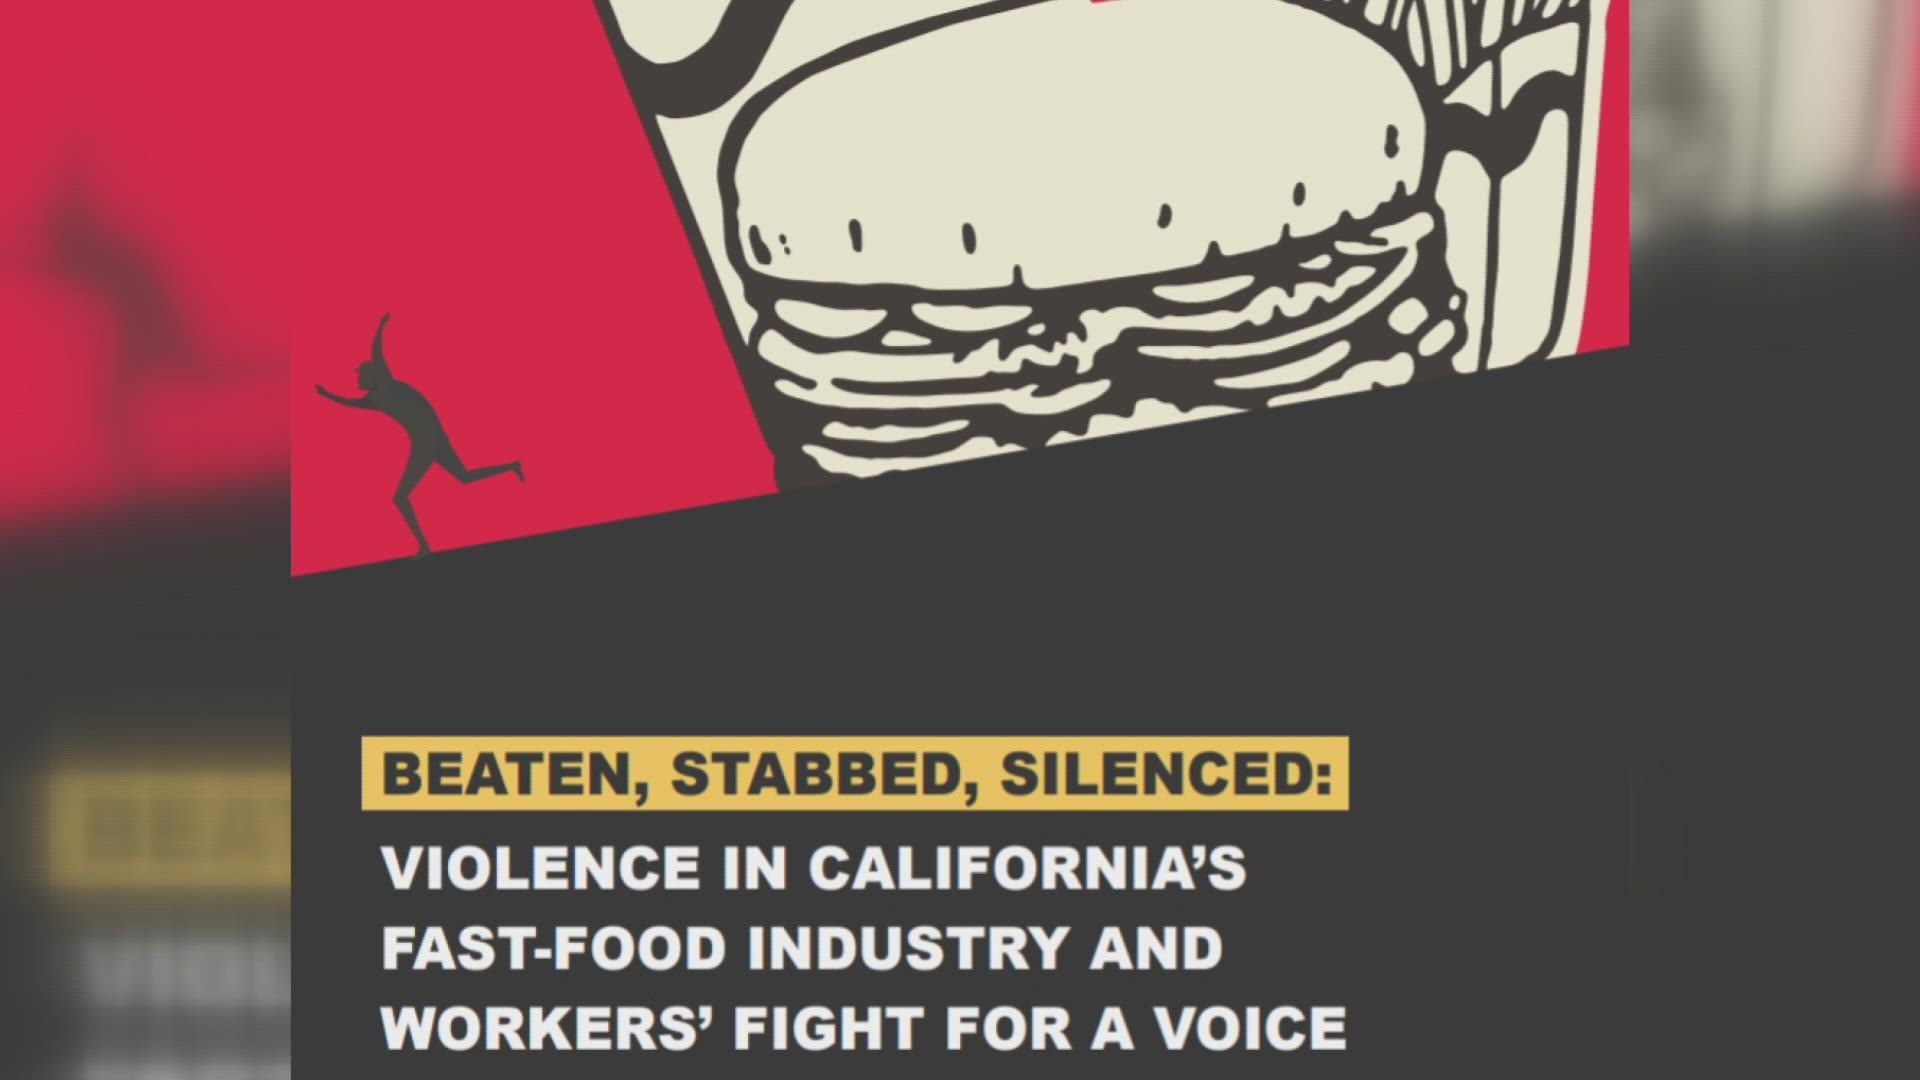 The fast food study paints a violent picture that workers face each day in California